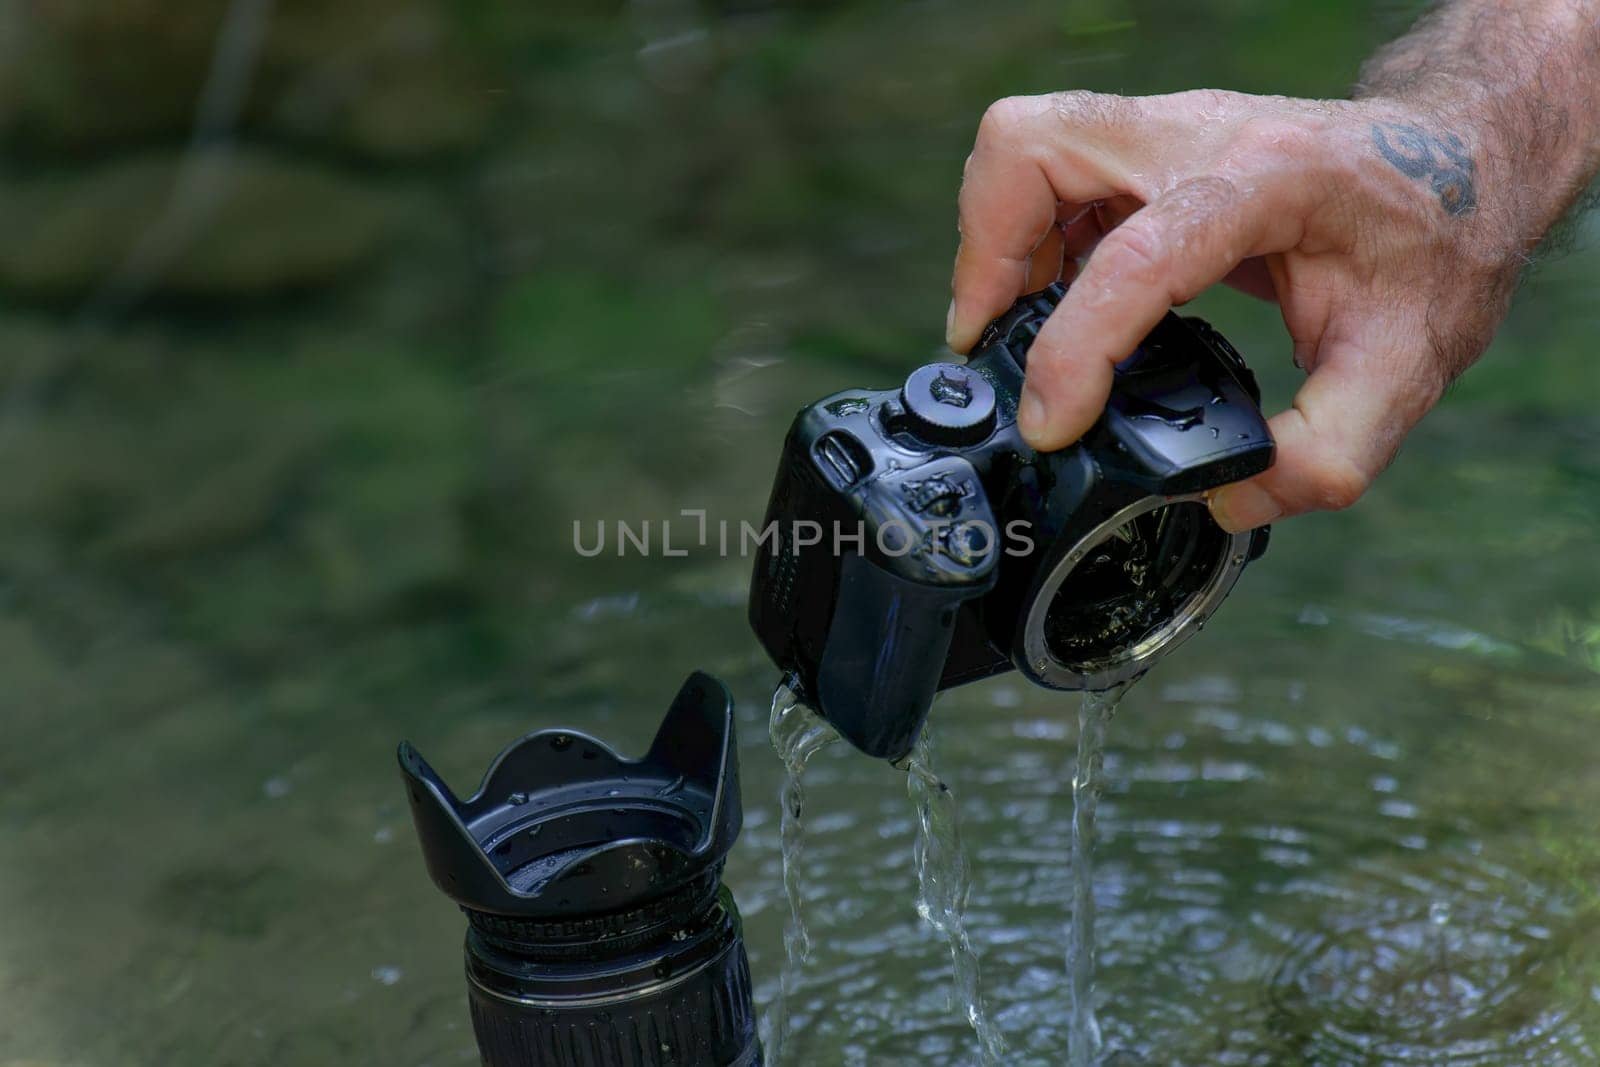 a man removes water from inside his reflex camera that has fallen into the river by joseantona